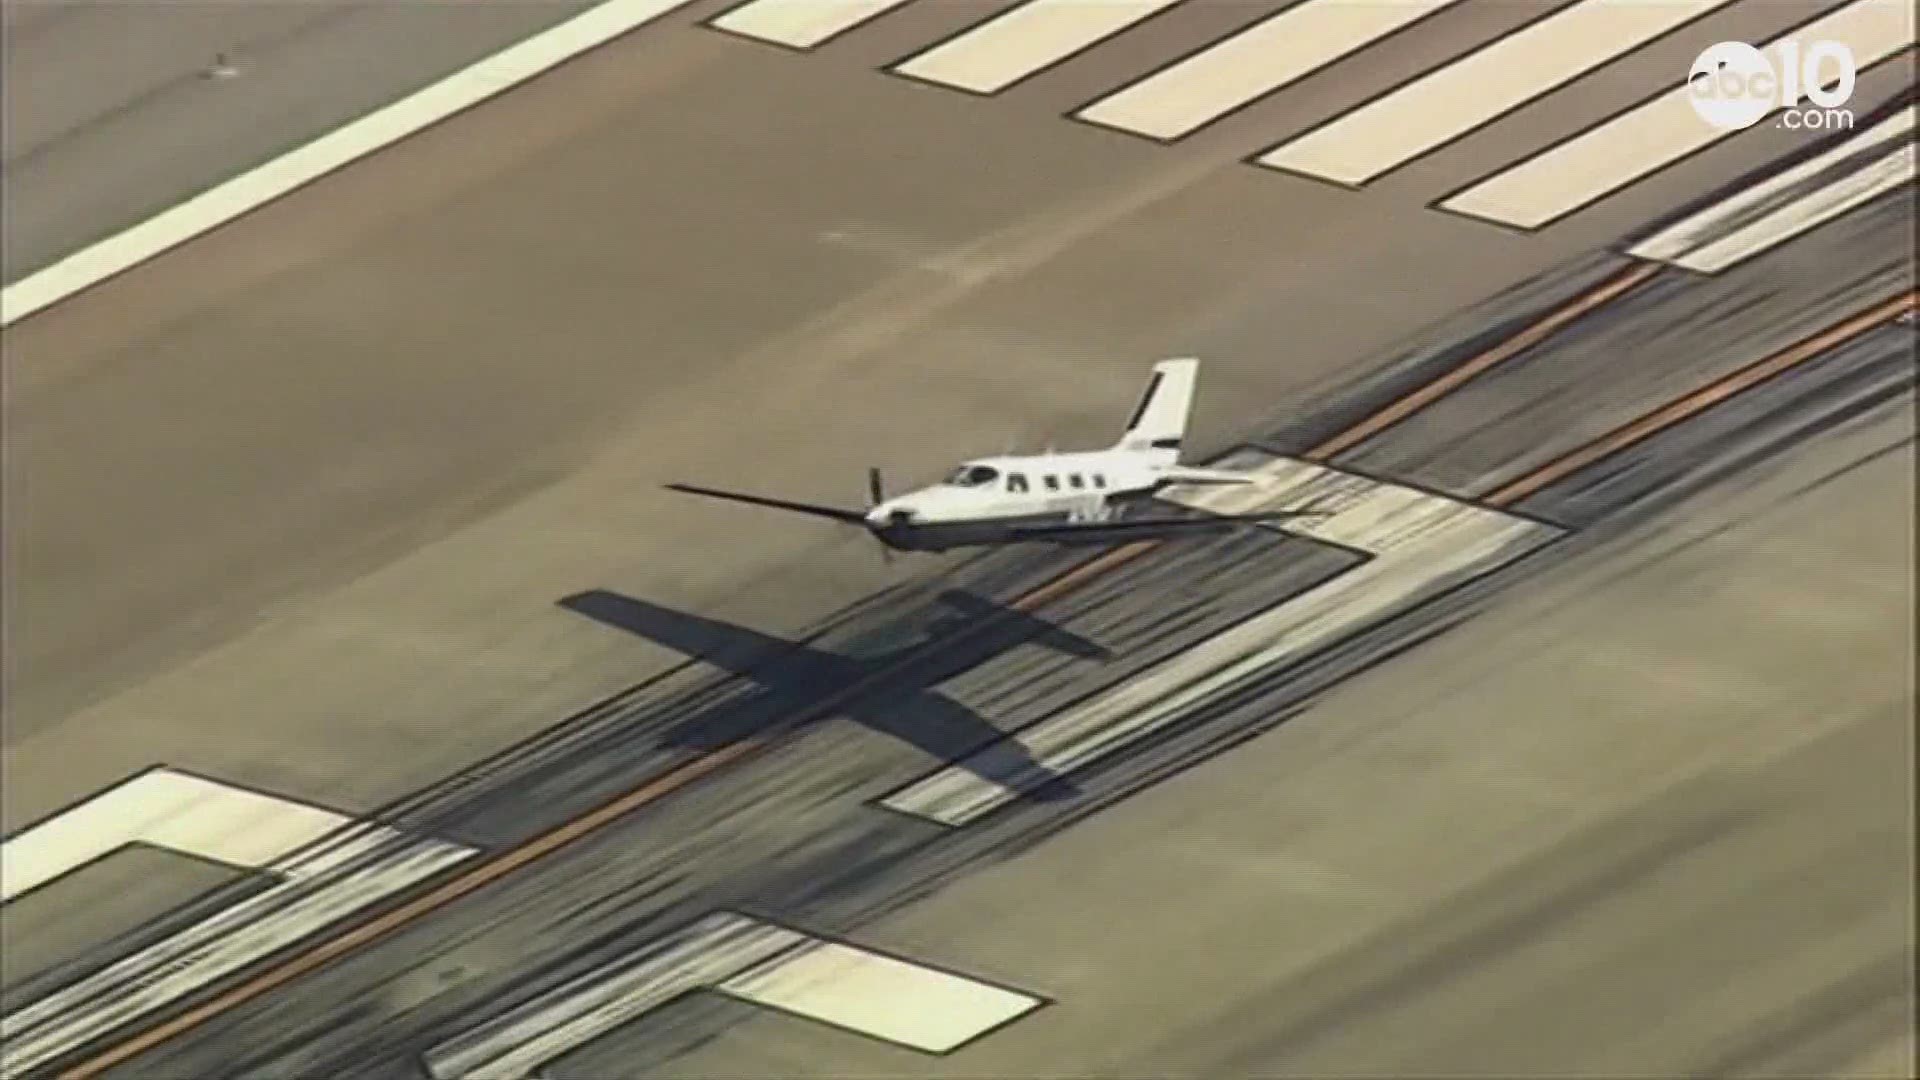 ABC10 affiliate KGO recorded as a small plane successfully landed on its belly at Mineta San Jose Airport after its landing gear failed.